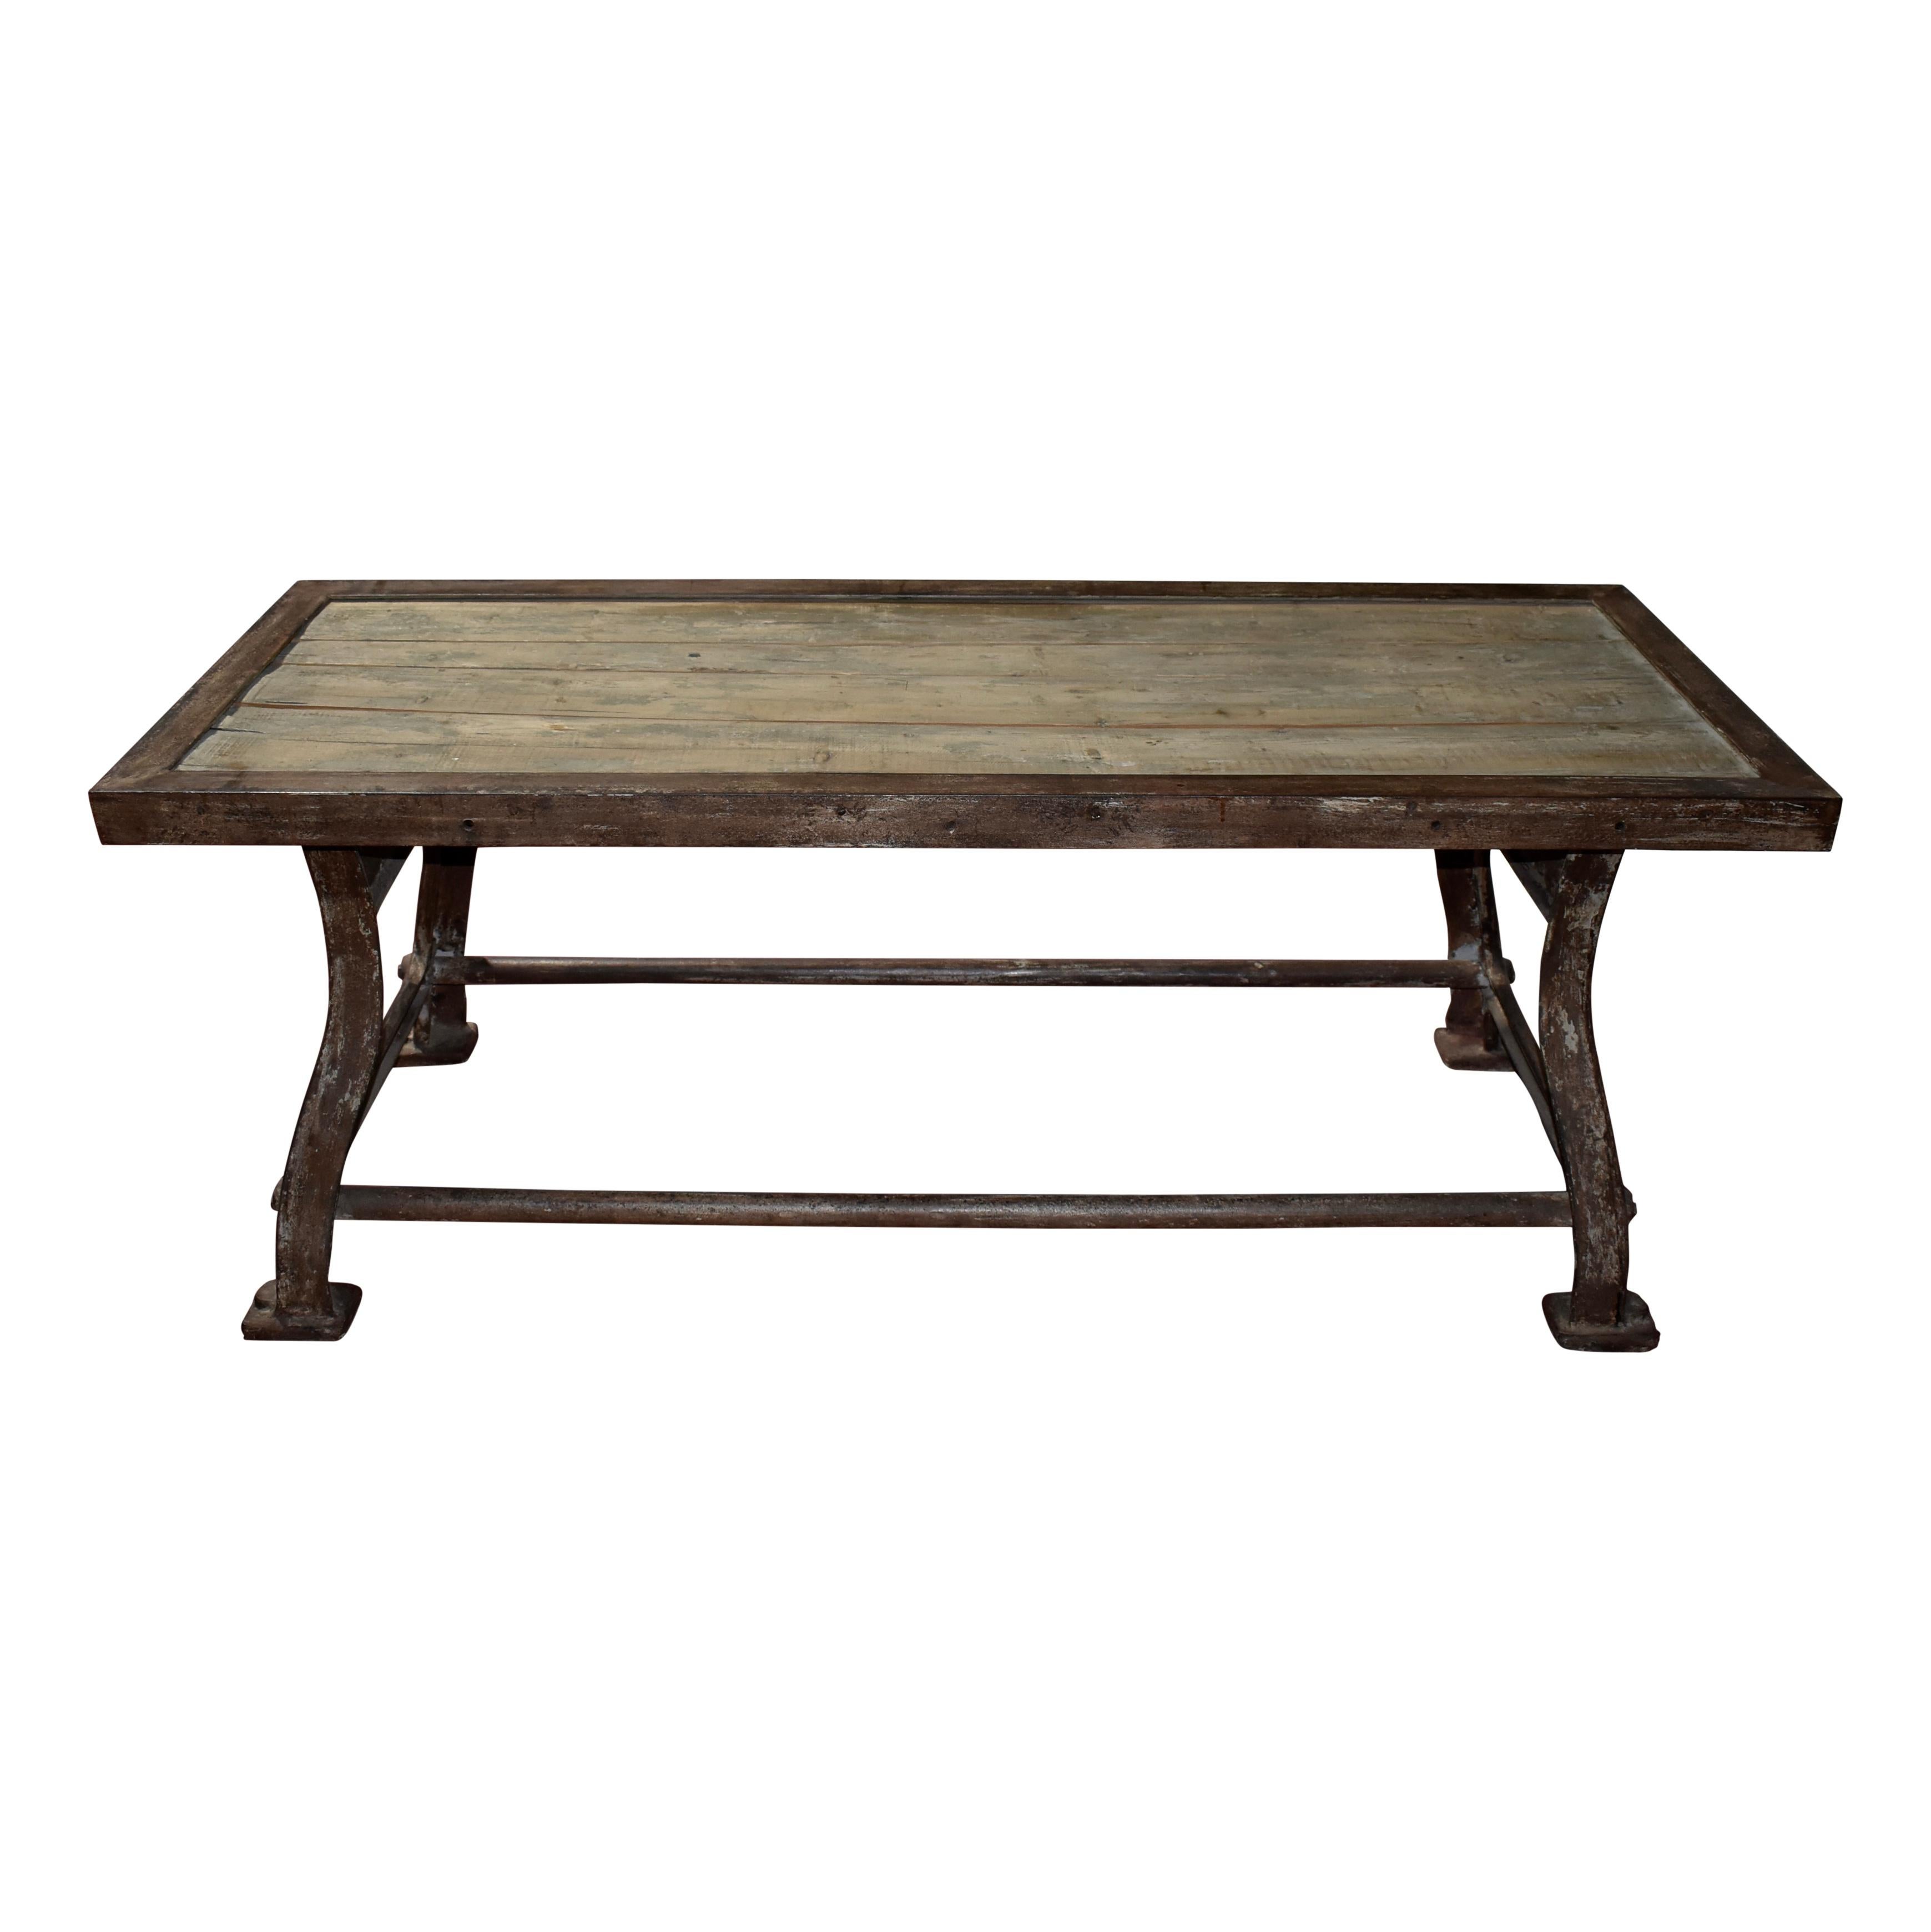 Sturdy and no nonsense, this industrial table features substantial iron legs united by iron stretchers. The wood plank top is framed in iron with intended separation between the planks, allowing the lower wood surface to show between the planks. The